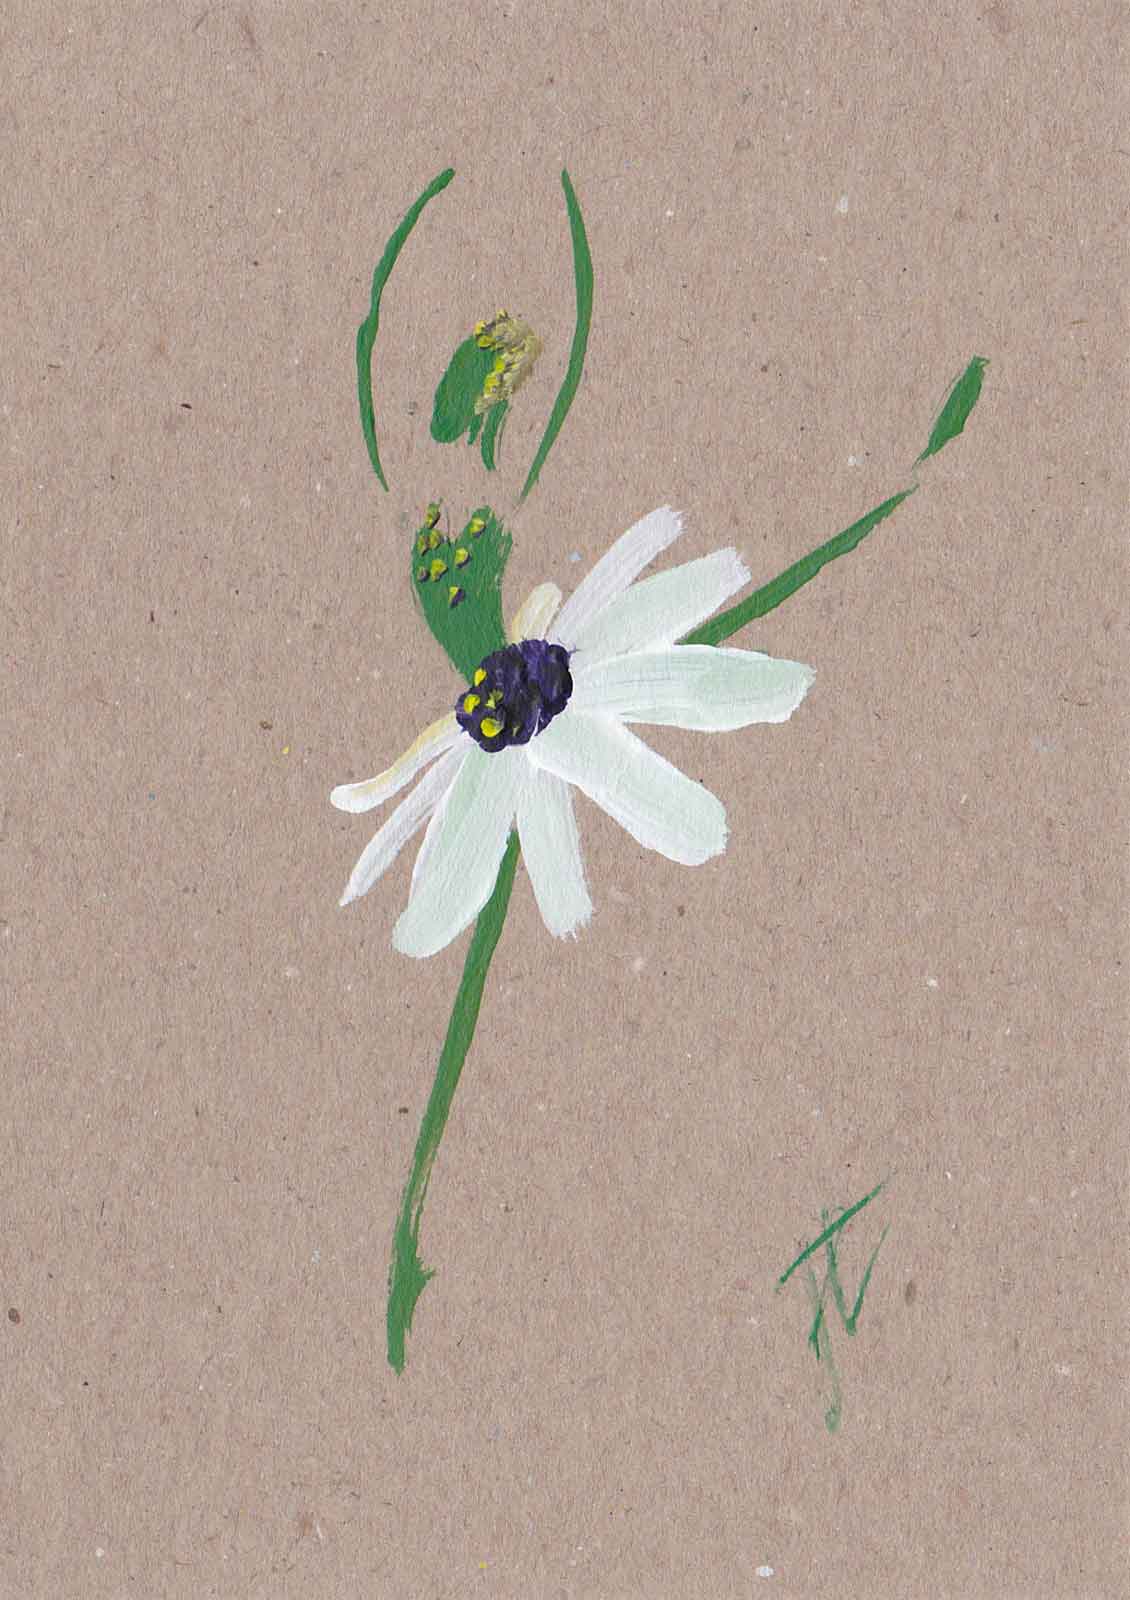 Ballerina in daisy tutu – painted design on brown note card